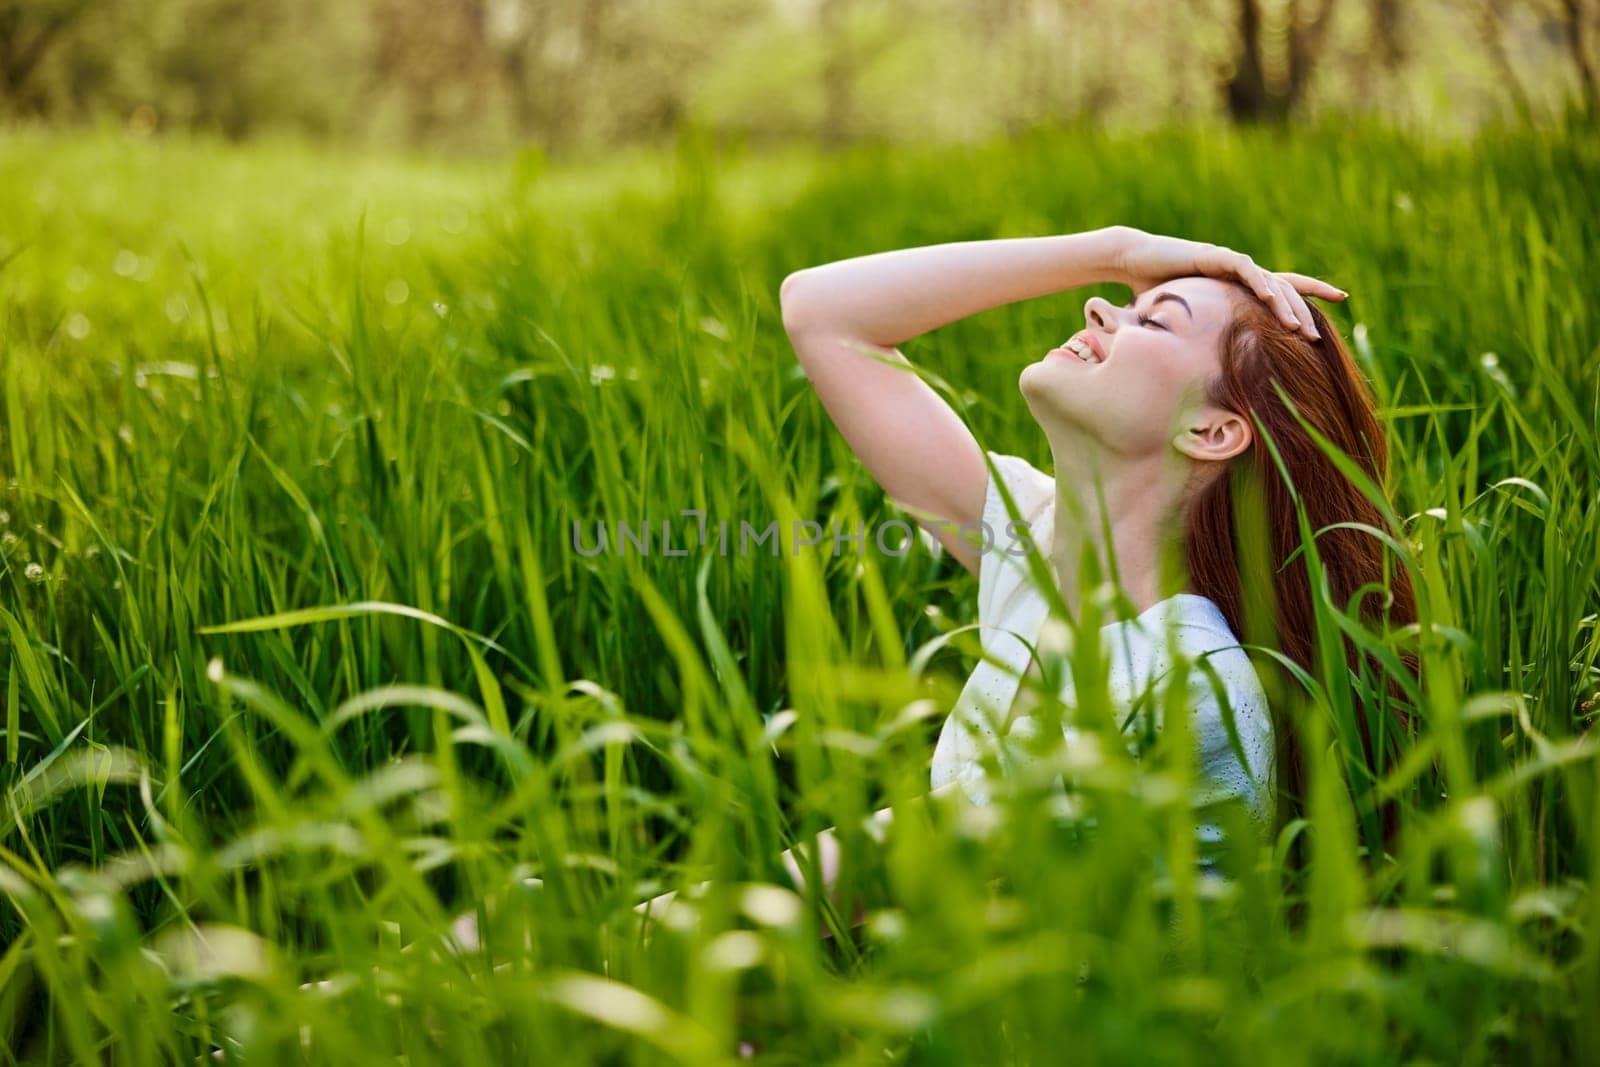 a red-haired woman stands in the tall grass, raising her oxen up and laughing widely with her teeth. High quality photo